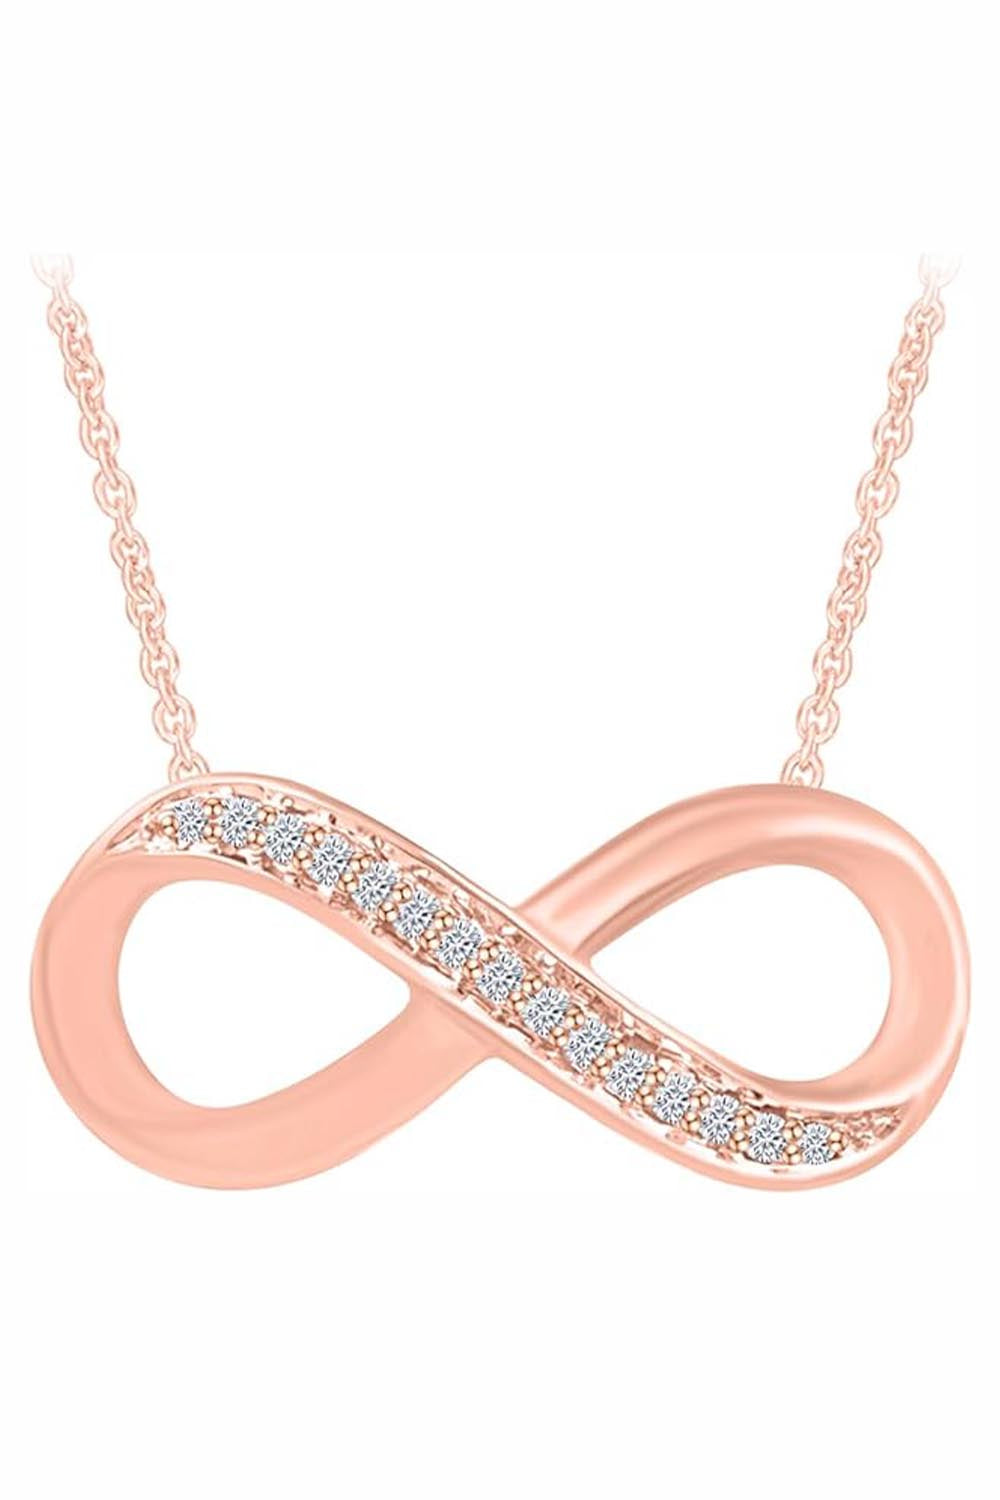 Rose Gold Color Yaathi Infinity Necklace, Women's Pendant Necklace